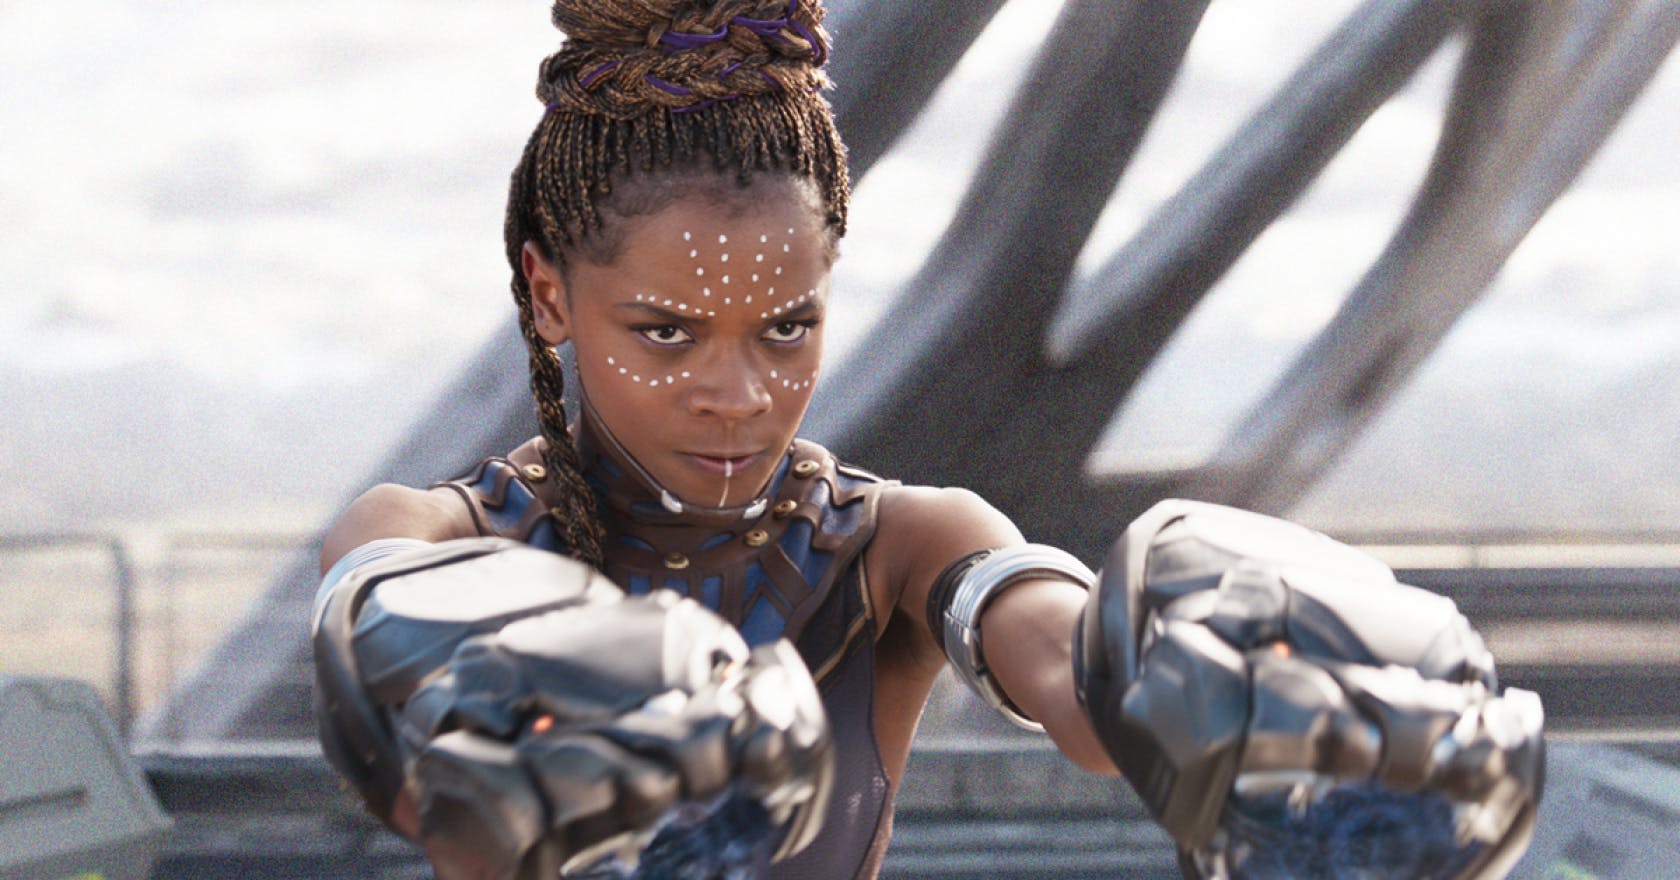 Black Panther's Shuri is getting her own spin-off comic book